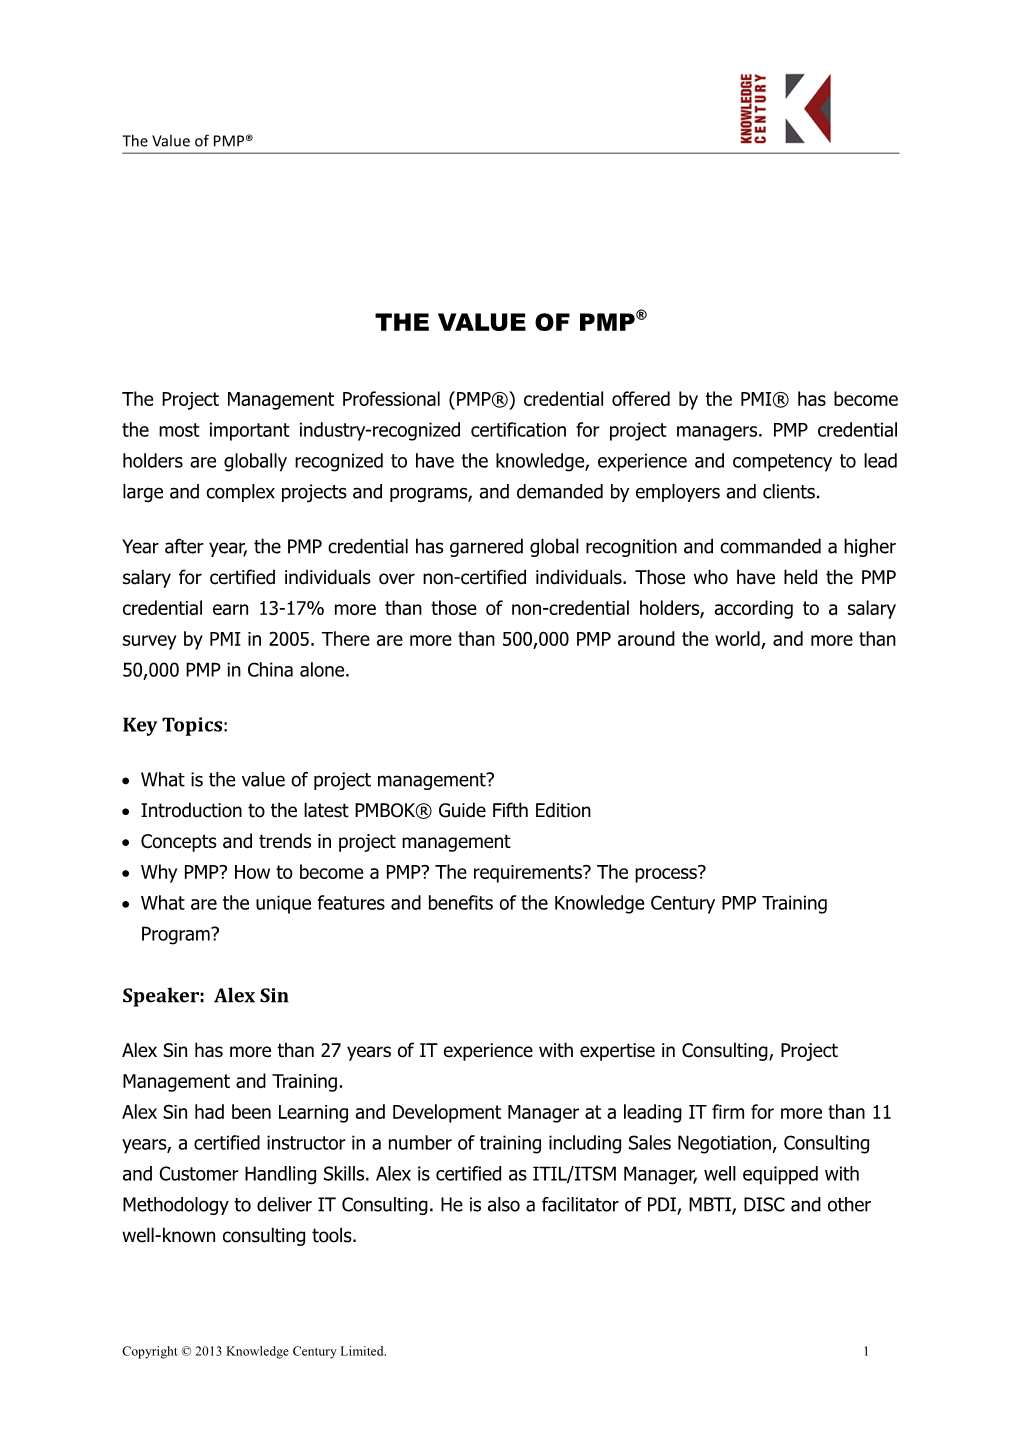 The Value of PMP